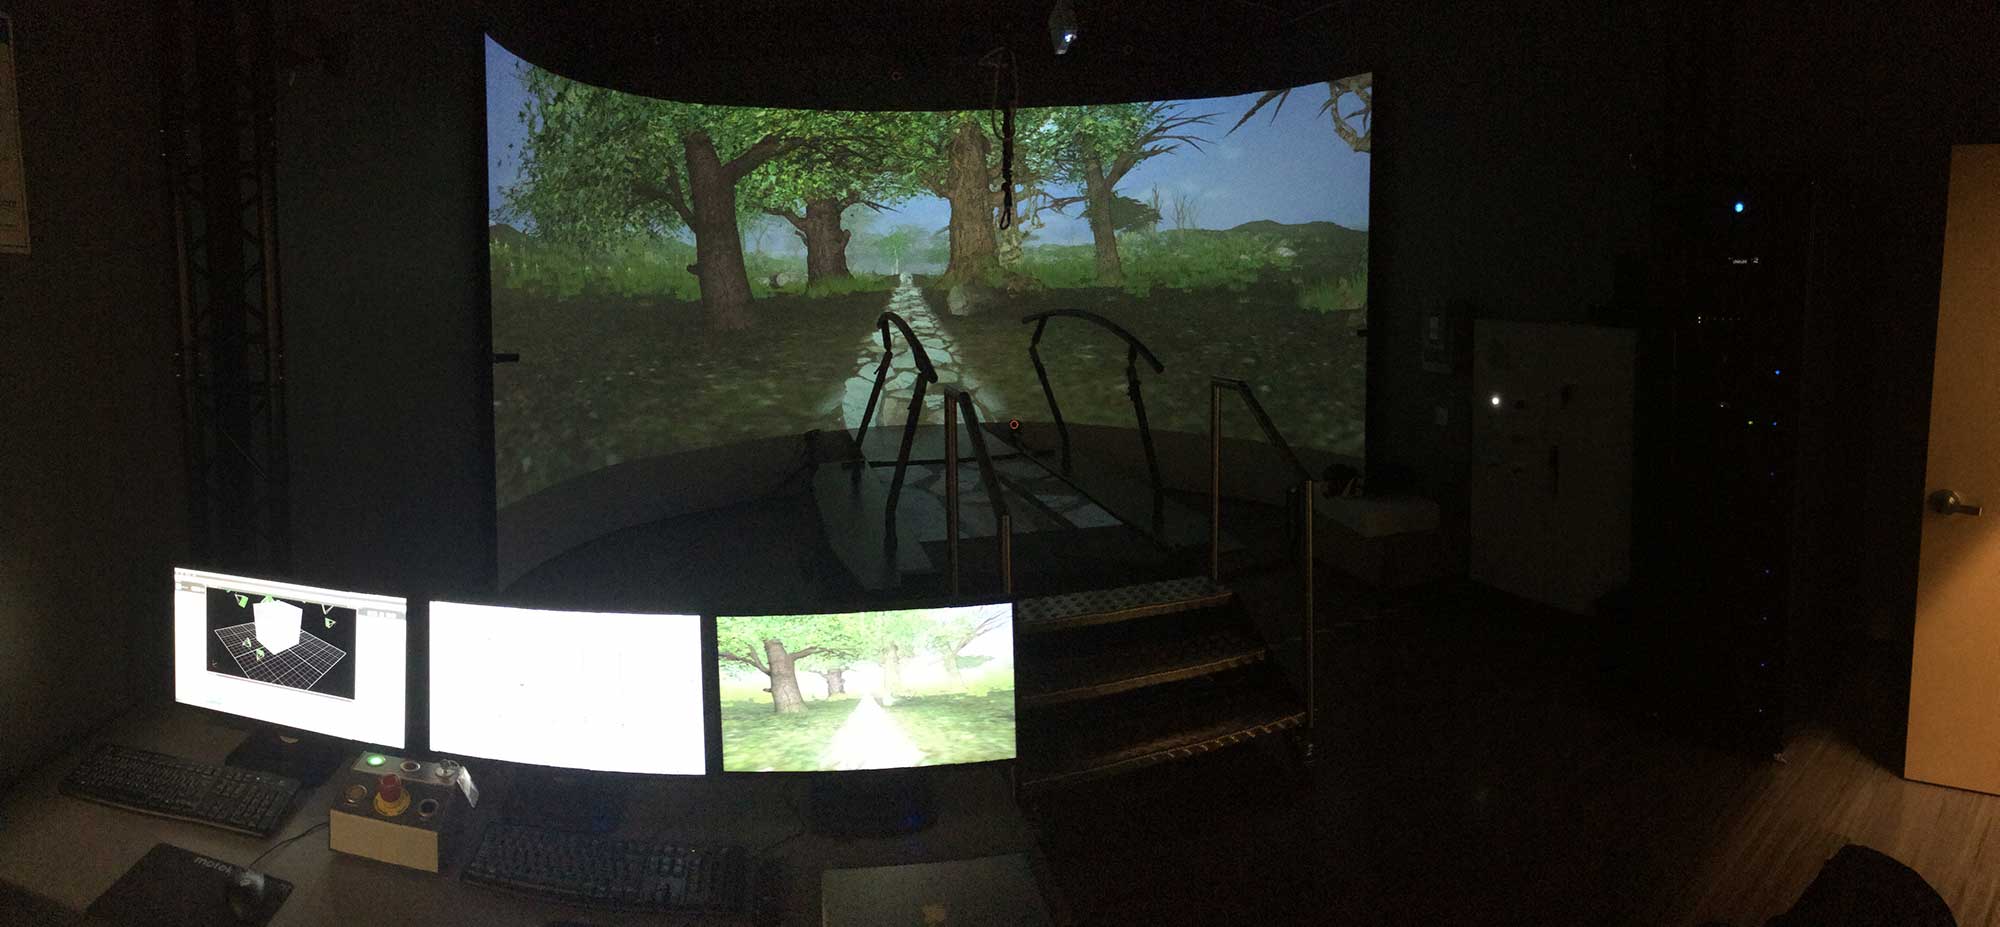 A virtual reality cobblestone trail in a forest displays on the enormous curved screen that surrounds the rehab treadmill